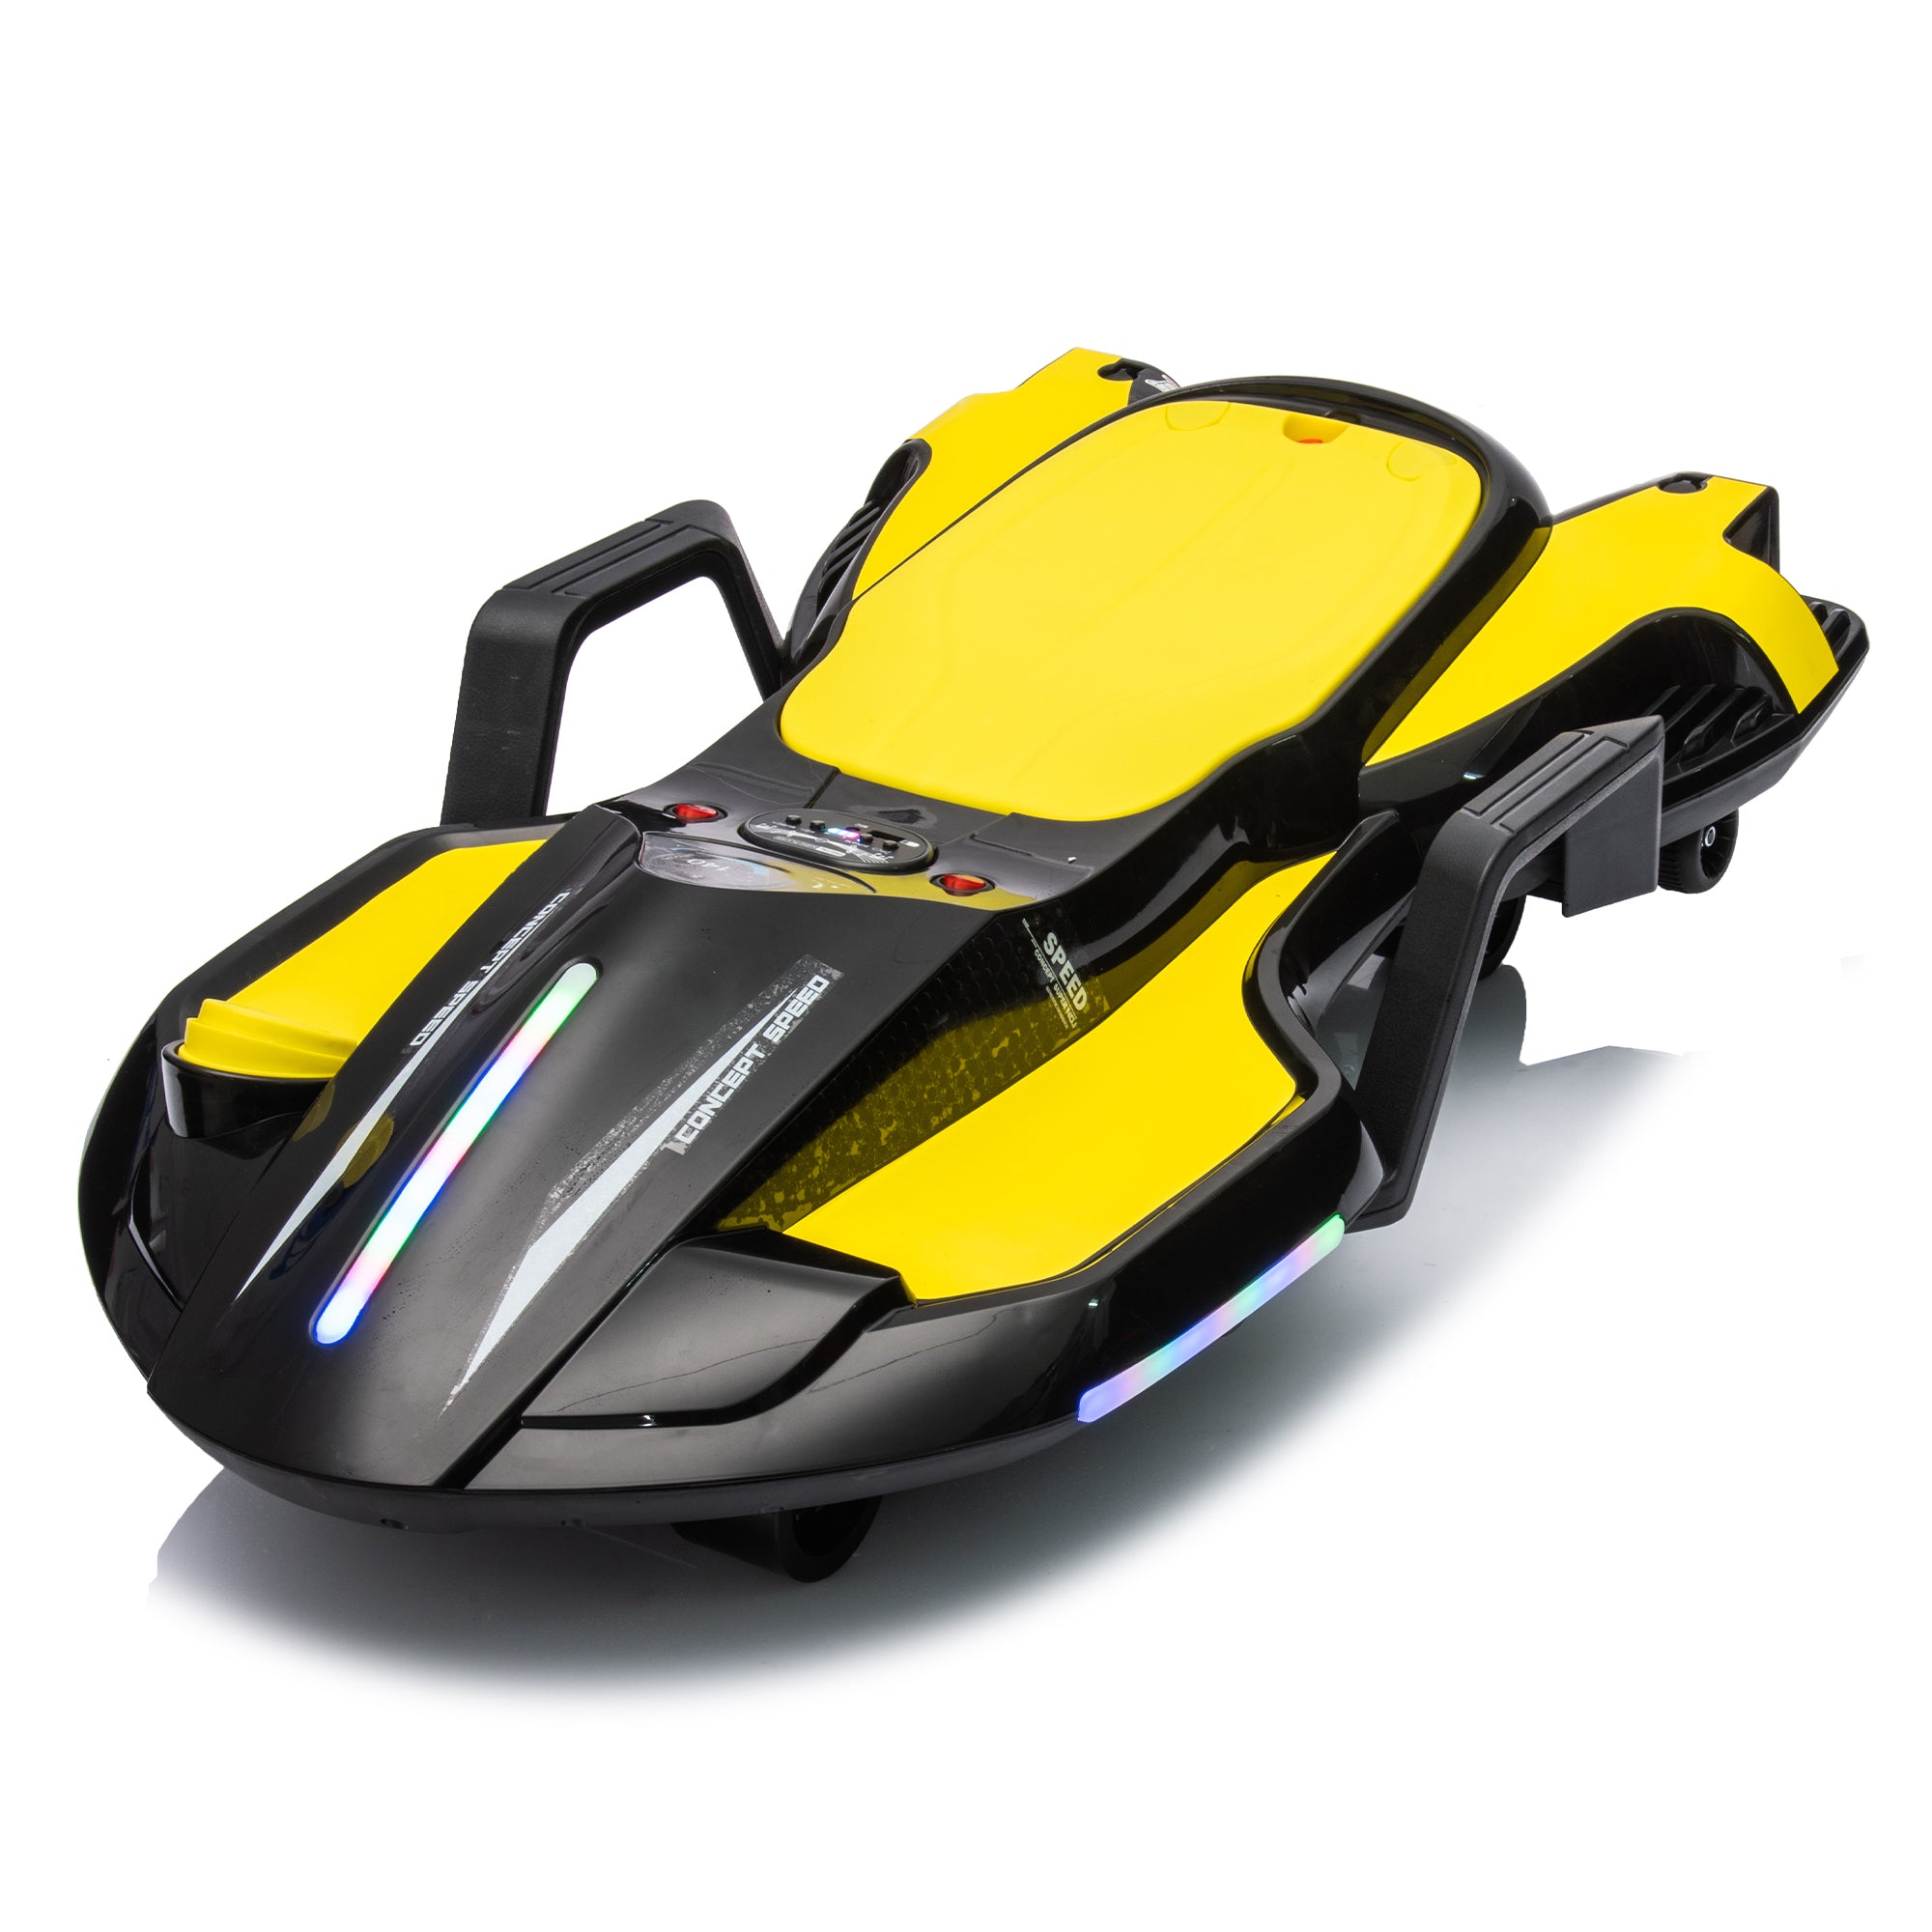 🆓🚛 24V Kids Ride On Electric Scooter W/ Helmet Knee Pads, Spray Function, 200W Motor, 5.59-6.84MPH, Gravity Steering, Bluetooth, Use for 1-2 Hours, Age 6+, Black & Yellow